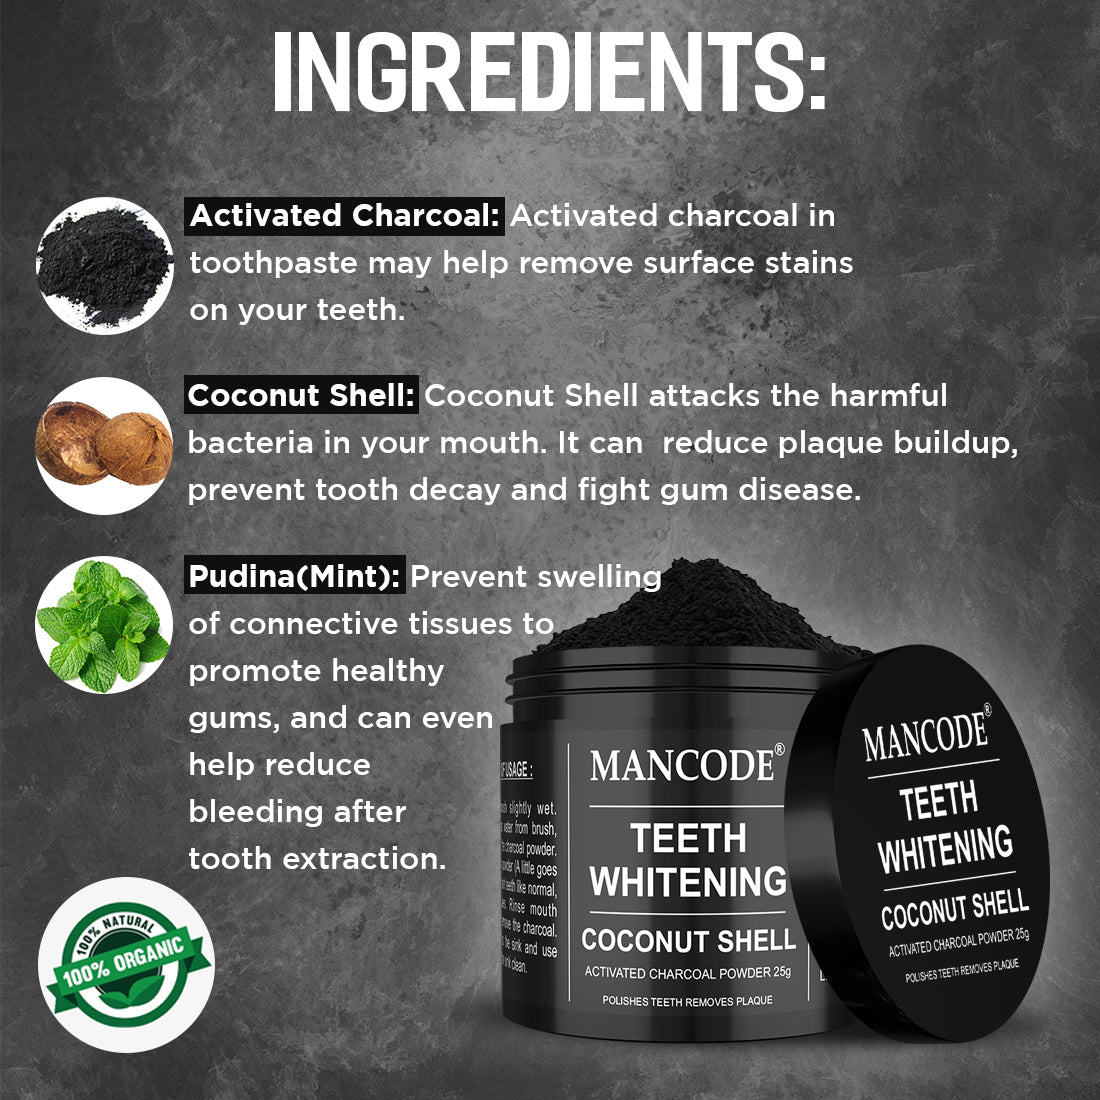 Coconut Shell Charcoal Powder for Teeth Whitening